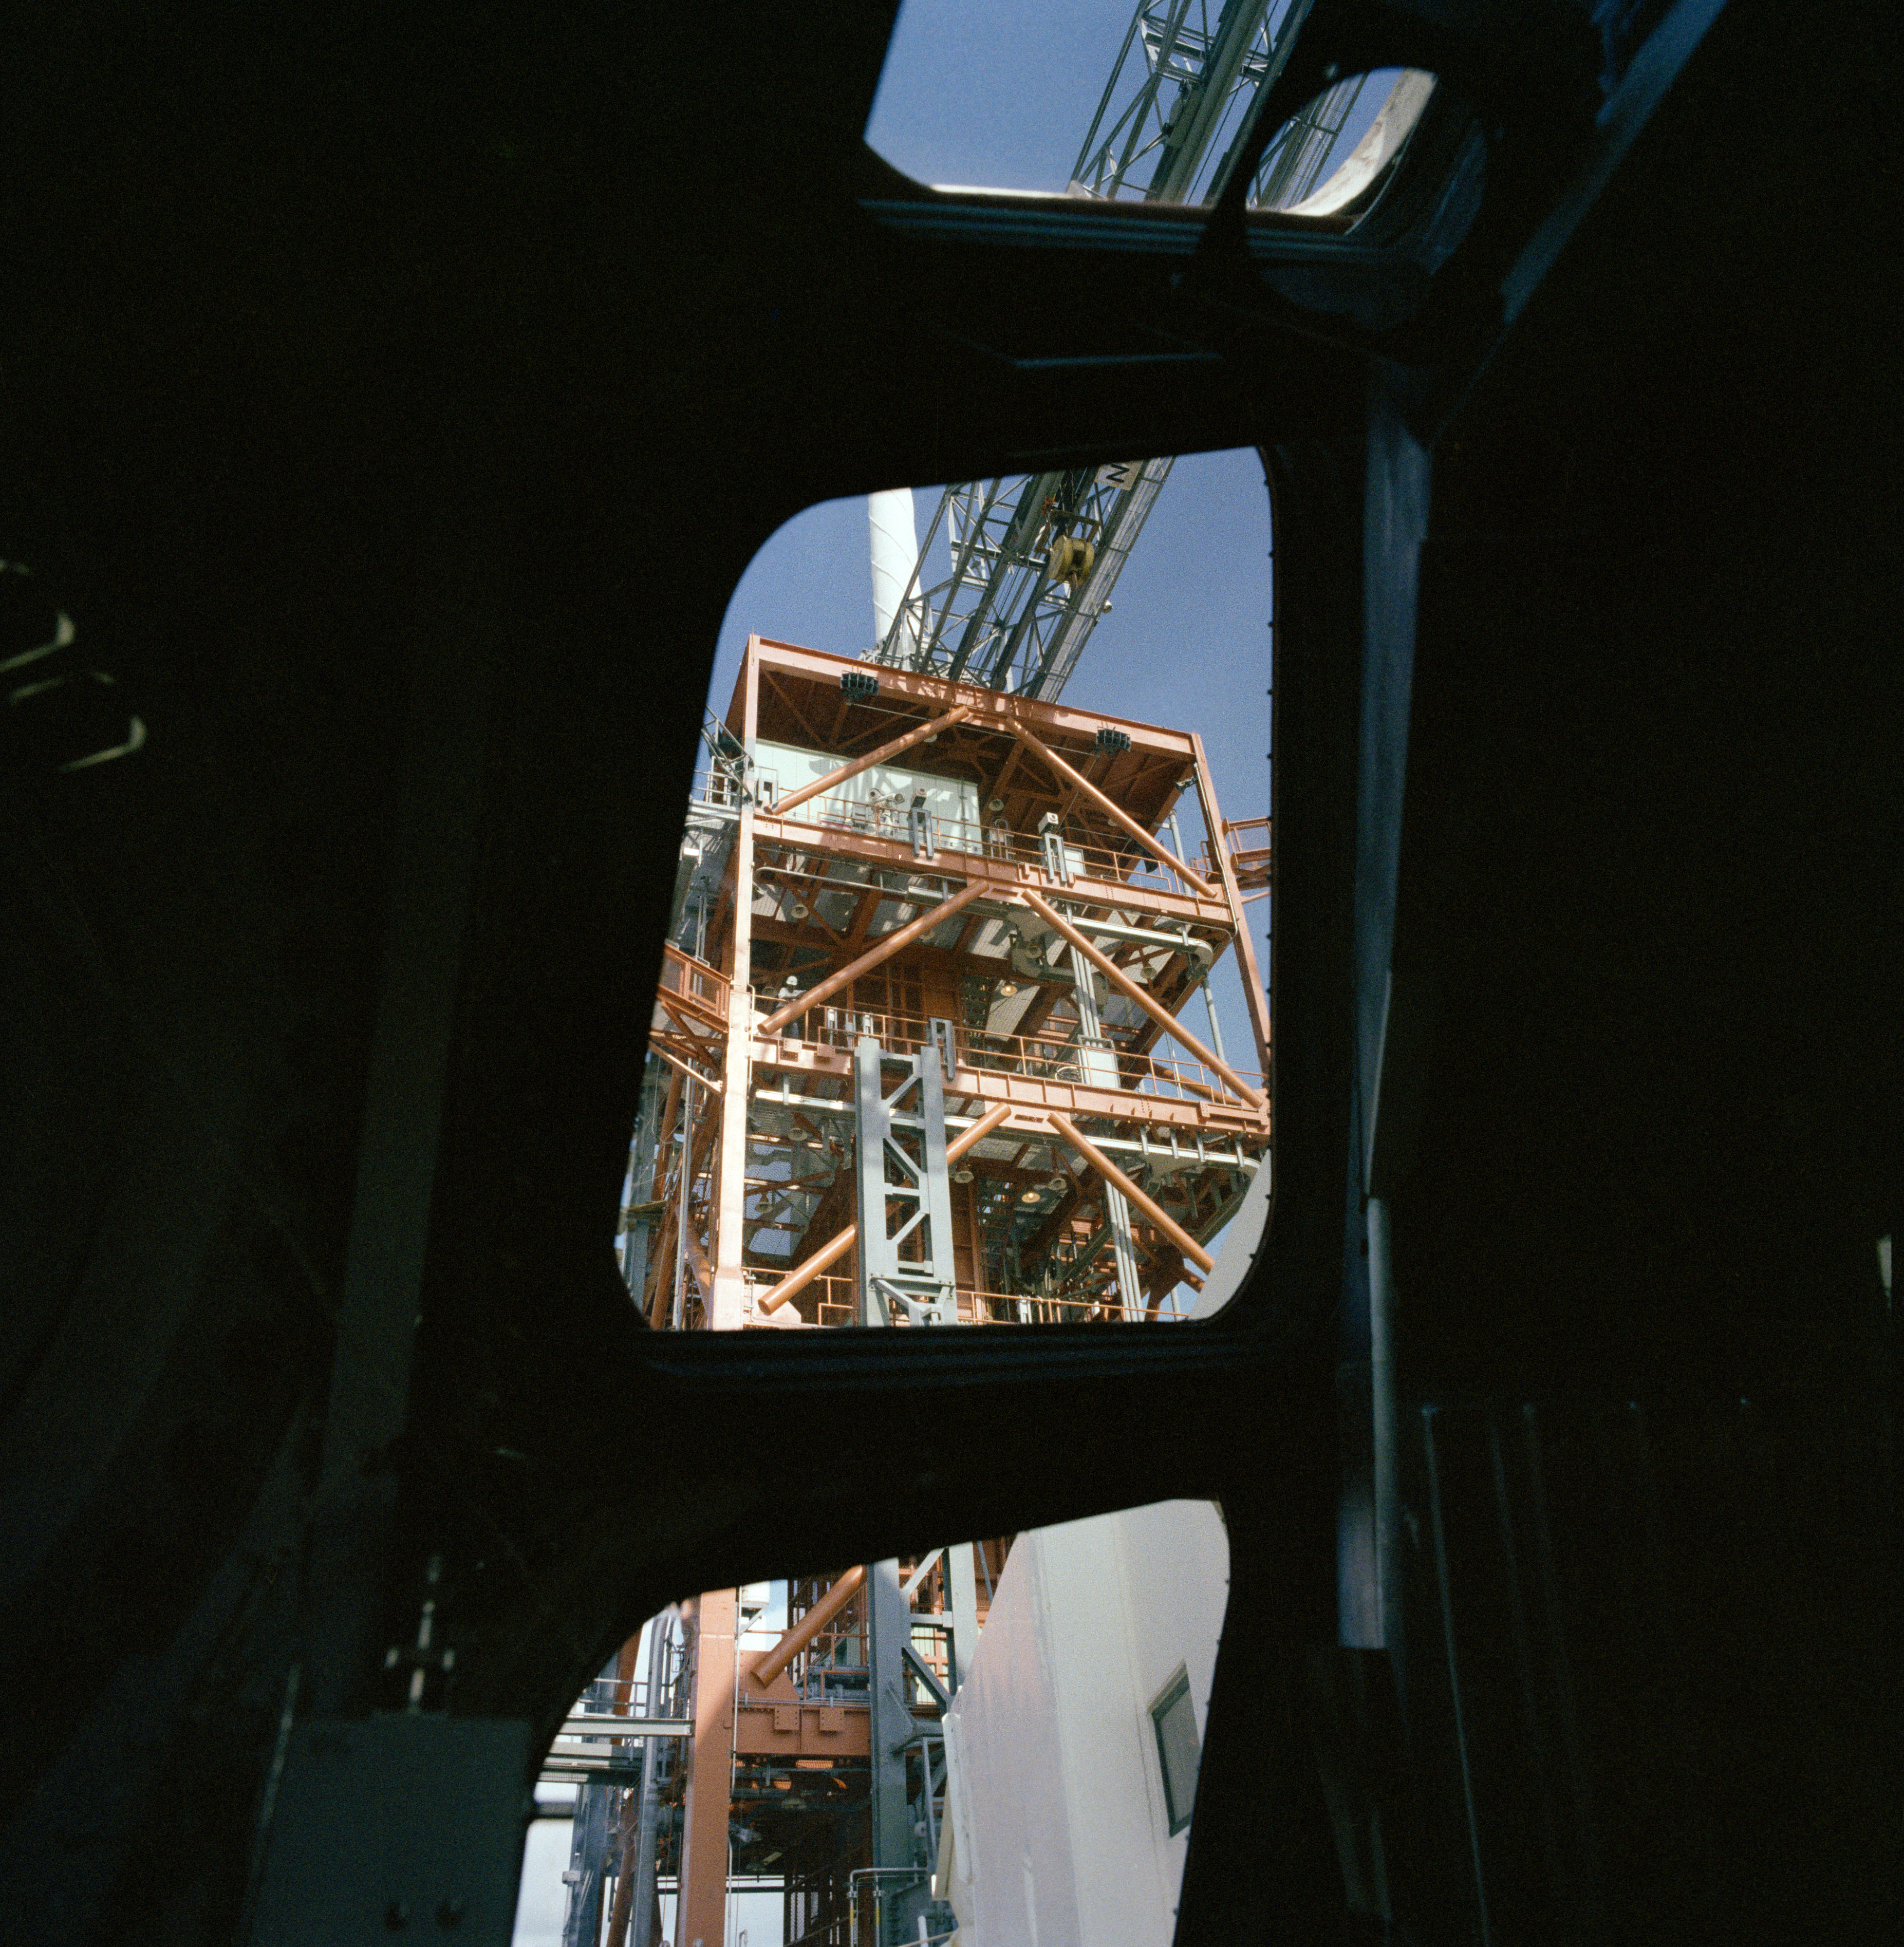 Pilot's eye view of the launch tower looking up through Enterprise's forward windows